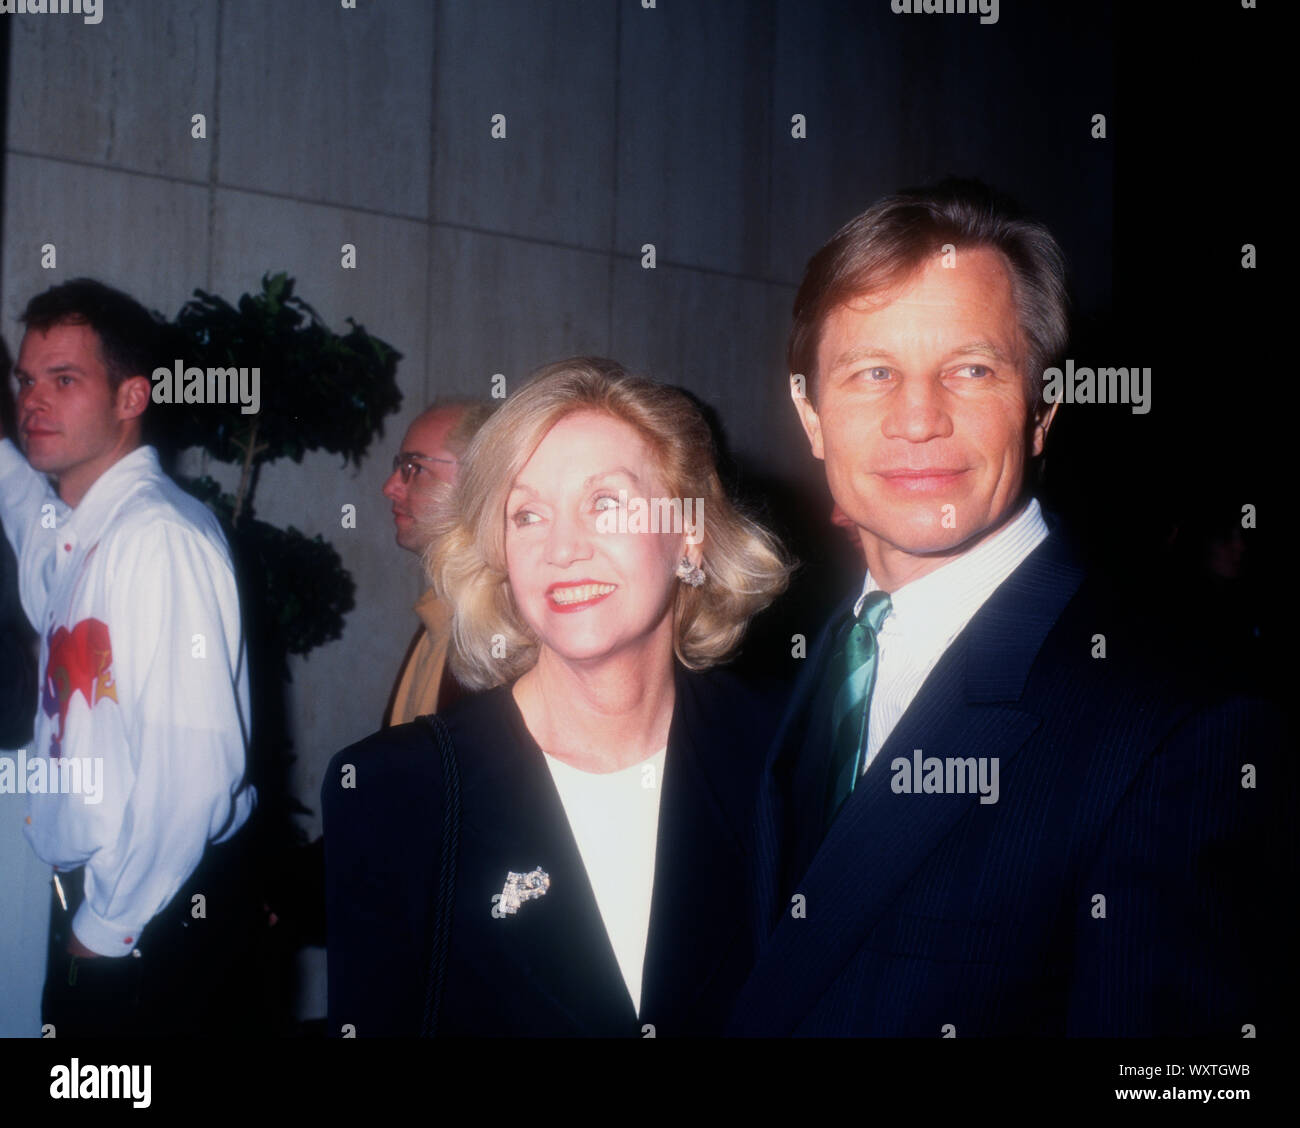 Westwood, California, USA 14th December 1994 Actor Michael York and wife Pat York attend the 'Ready To Wear' (Pret-a-Porter) Premiere on December 14, 1994 at the Avco Center Cinemas in Westwood, California, USA. Photo by Barry King/Alamy Stock Photo Stock Photo